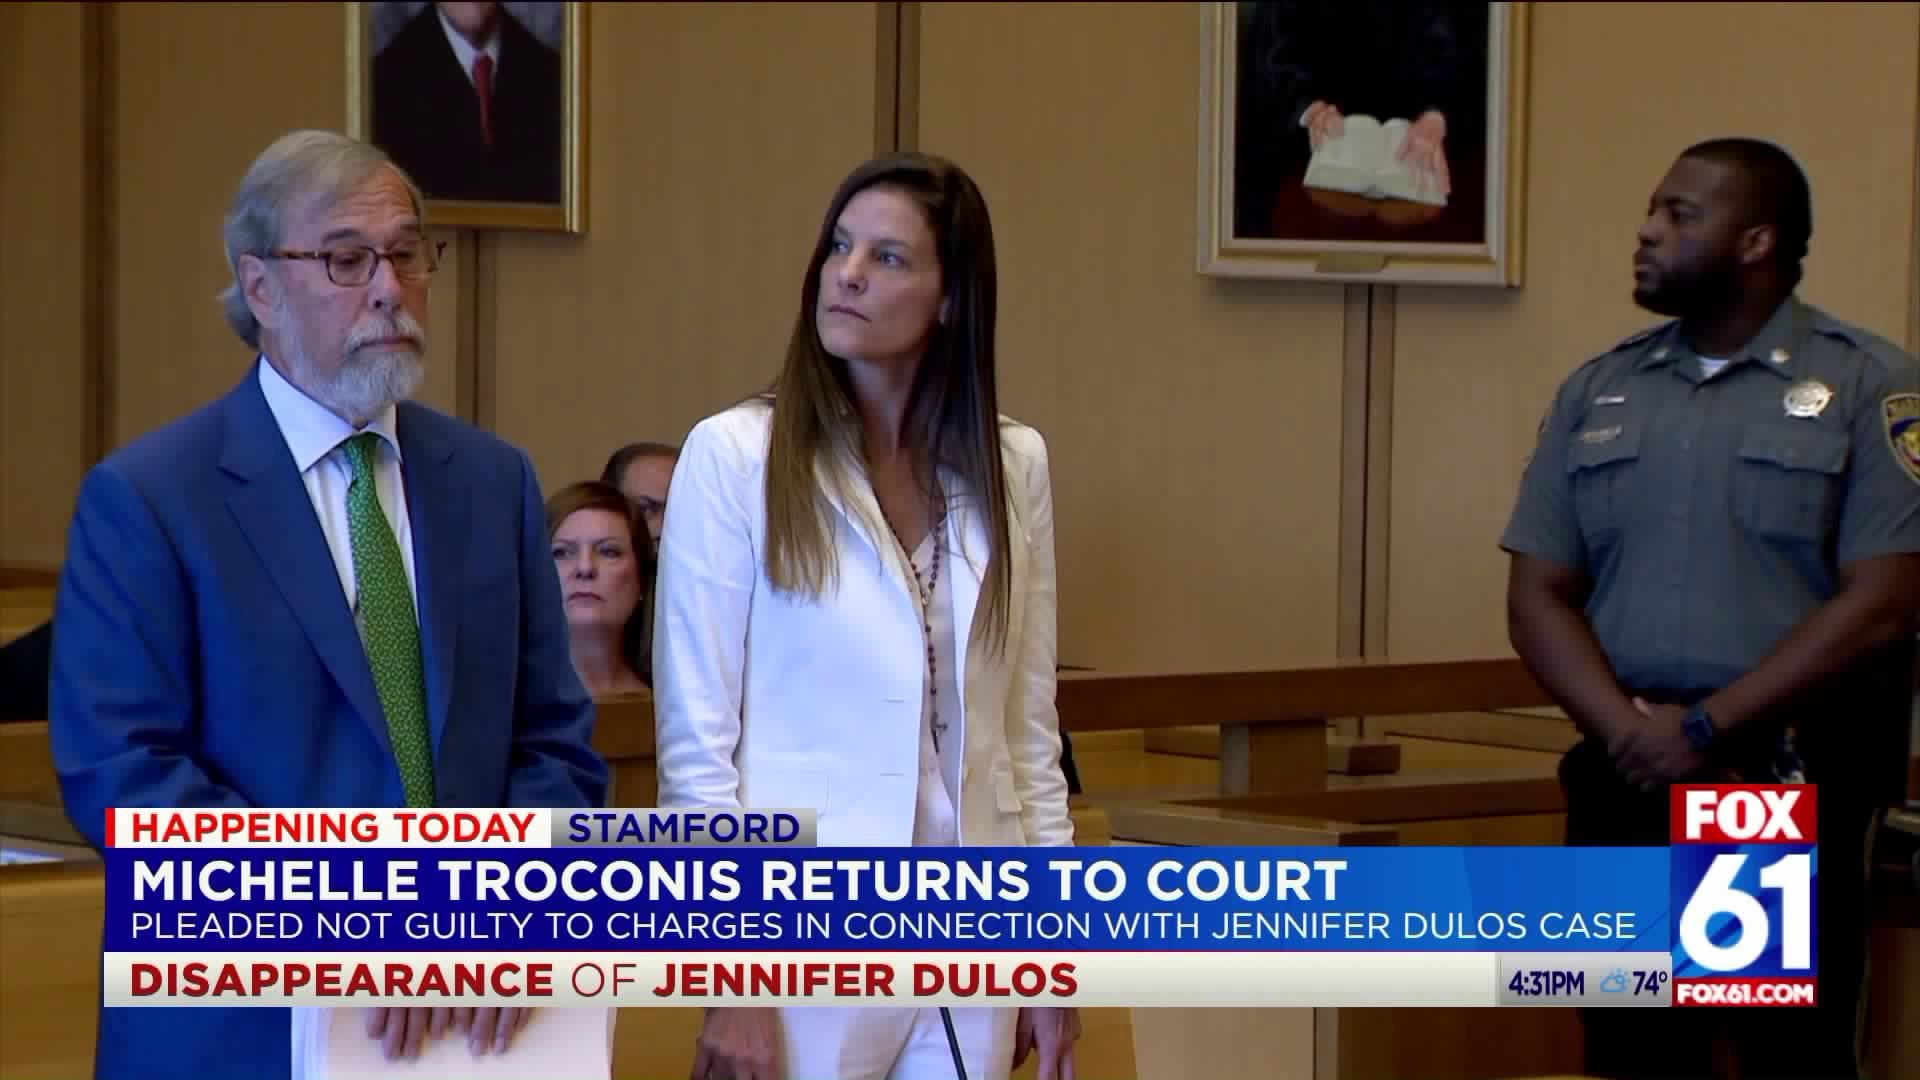 Michelle Troconis hearing continued to August 19th after appearing before judge Thursday